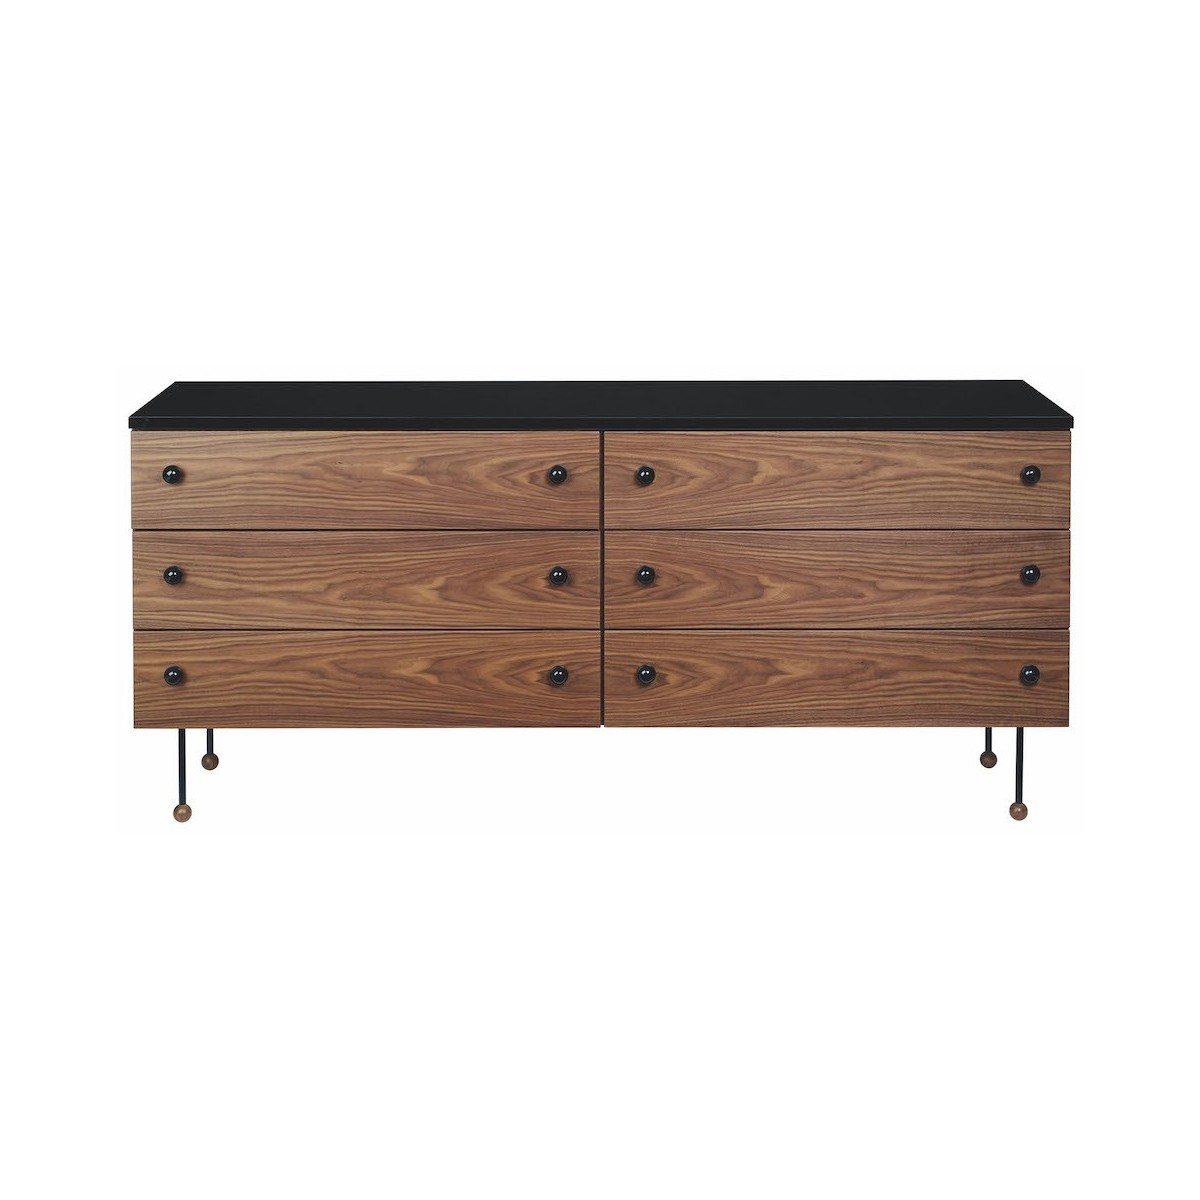 6 drawers - "62-collection" dresser